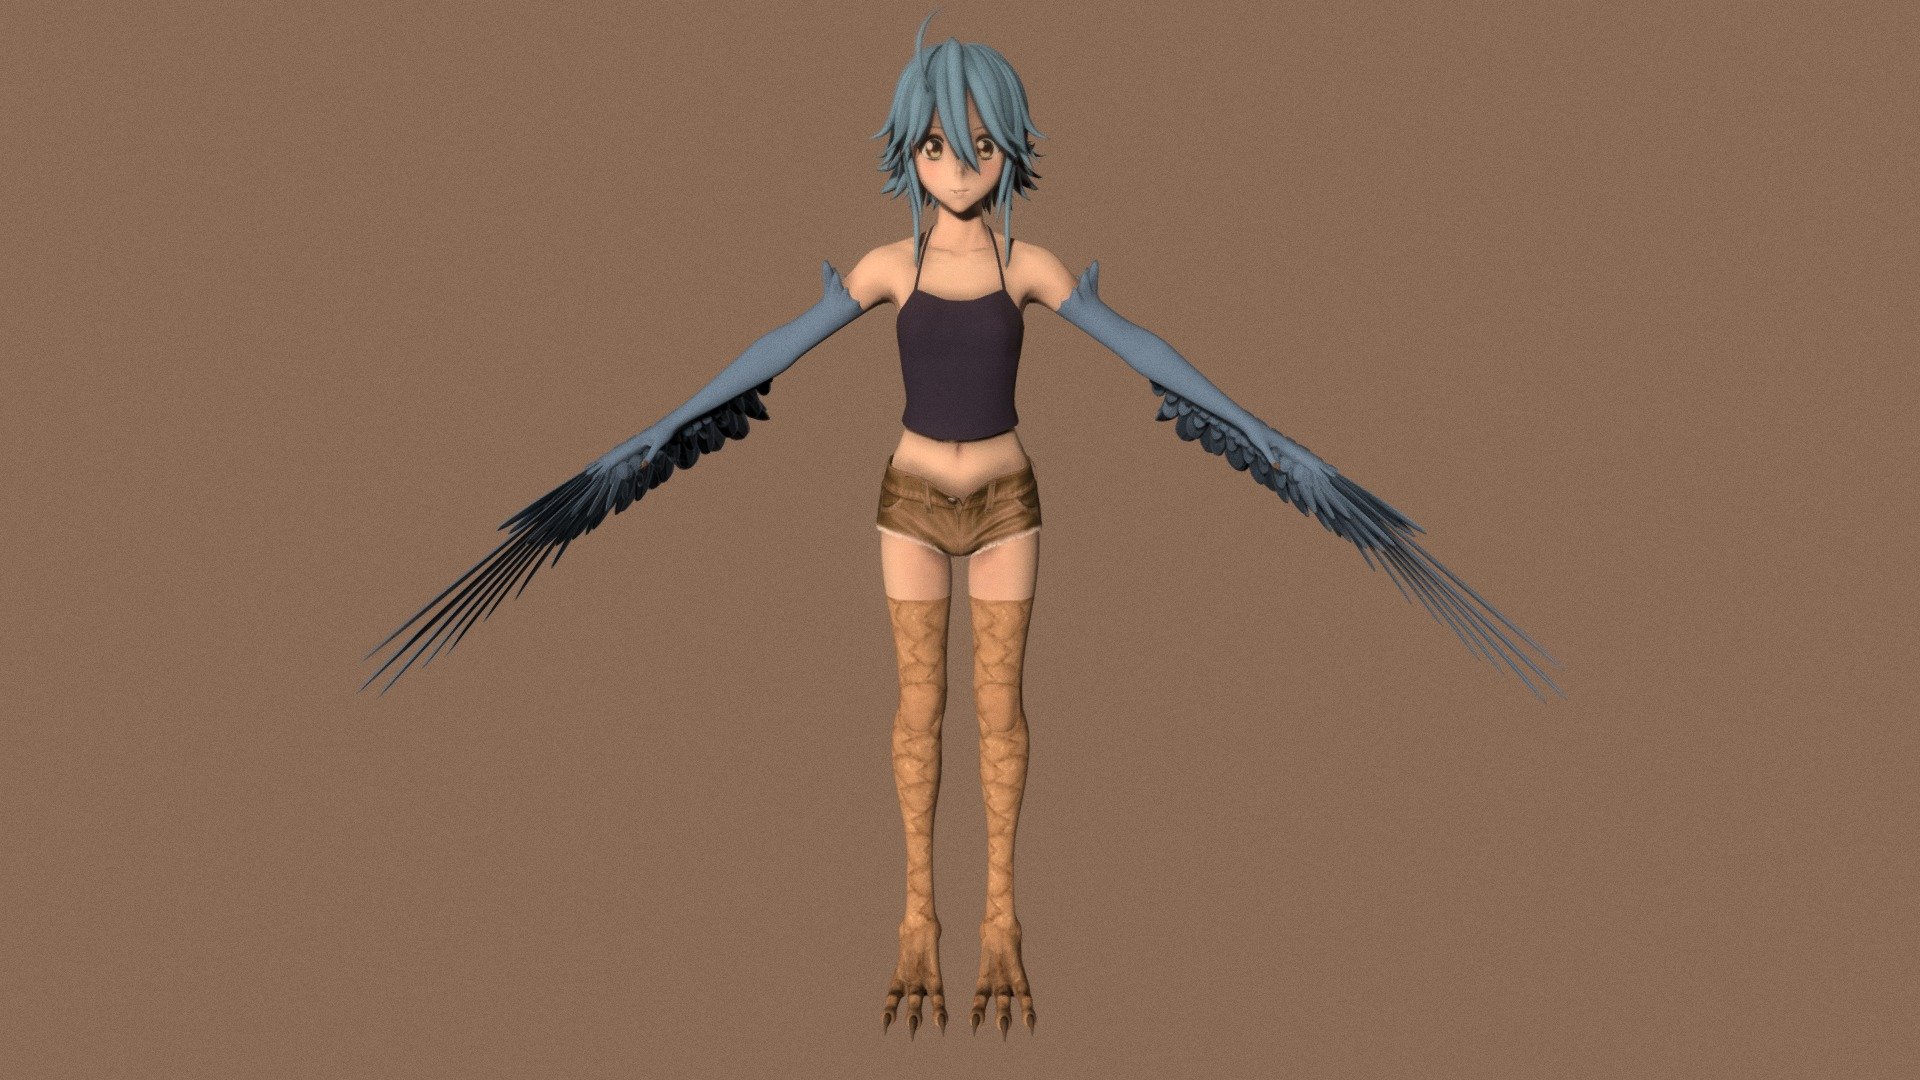 T-pose rigged model of anime girl Papi (Monster Musume).

Body and clothings are rigged and skinned by 3ds Max CAT system.

Eye direction and facial animation controlled by Morpher modifier / Shape Keys / Blendshape.

This product include .FBX (ver. 7200) and .MAX (ver. 2010) files.

3ds Max version is turbosmoothed to give a high quality render (as you can see here).

Original main body mesh have ~7.000 polys.

This 3D model may need some tweaking to adapt the rig system to games engine and other platforms.

I support convert model to various file formats (the rig data will be lost in this process): 3DS; AI; ASE; DAE; DWF; DWG; DXF; FLT; HTR; IGS; M3G; MQO; OBJ; SAT; STL; W3D; WRL; X.

You can buy all of my models in one pack to save cost: https://sketchfab.com/3d-models/all-of-my-anime-girls-c5a56156994e4193b9e8fa21a3b8360b

And I can make commission models.

If you have any questions, please leave a comment or contact me via my email 3d.eden.project@gmail.com 3d model